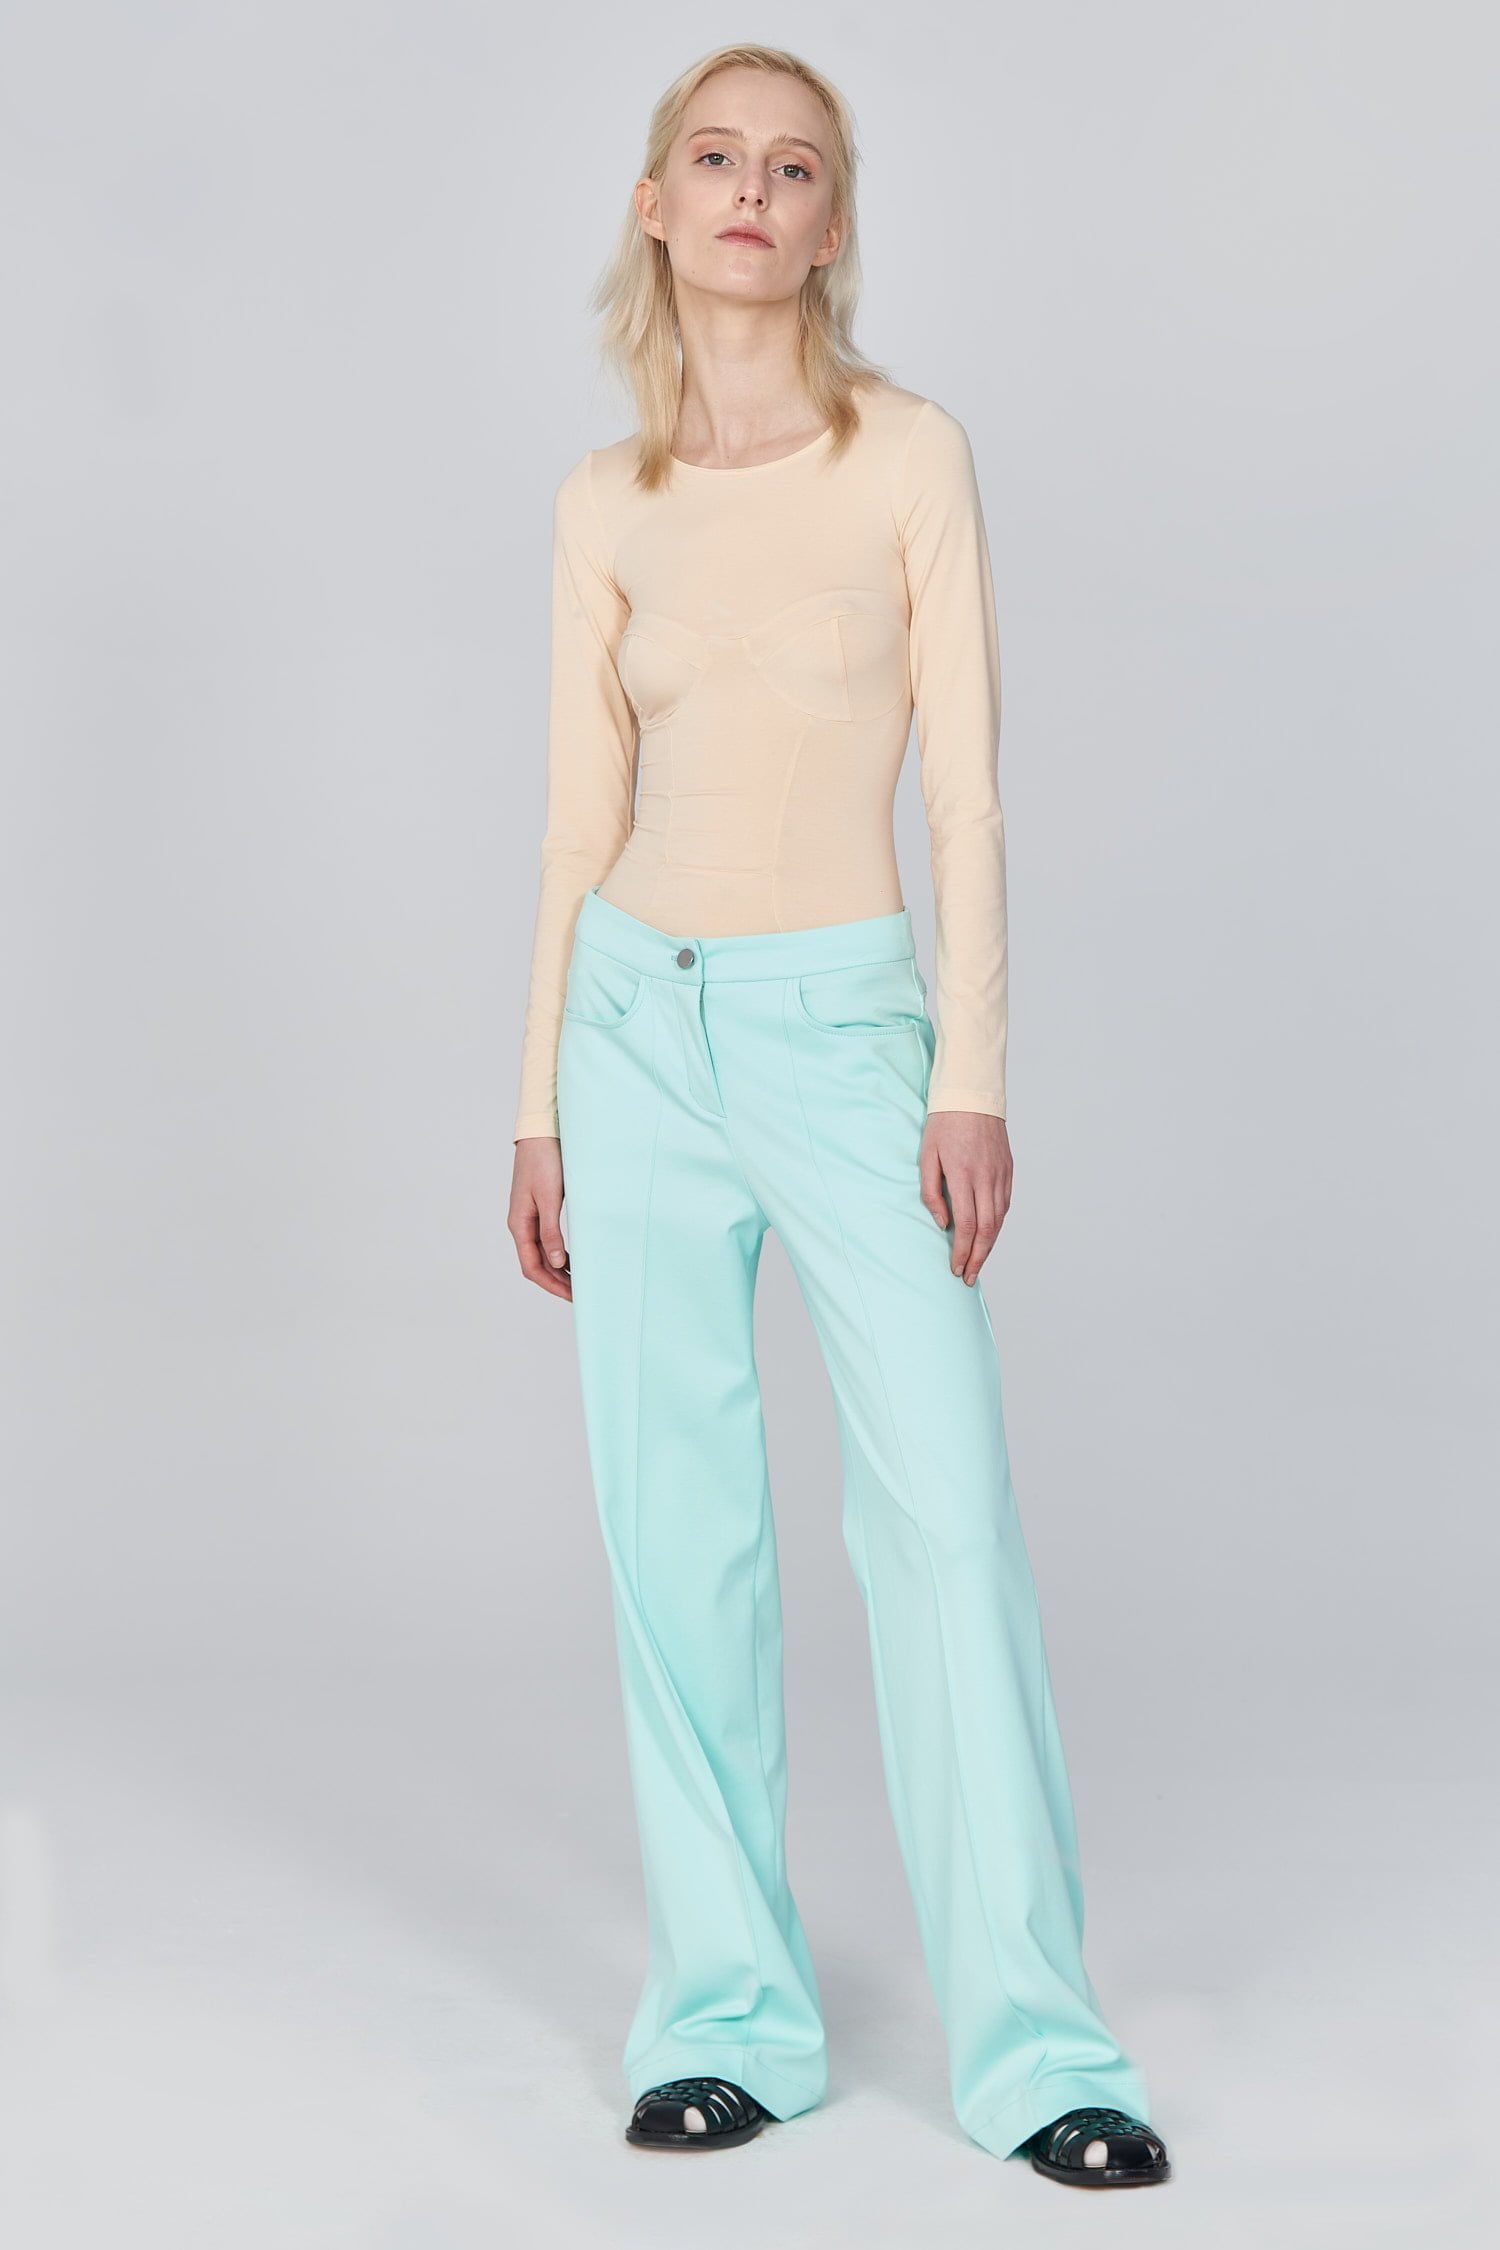 Acephala Ss21 Flared Mint Trousers Bustier Longsleeve Top Front Relaxed 2